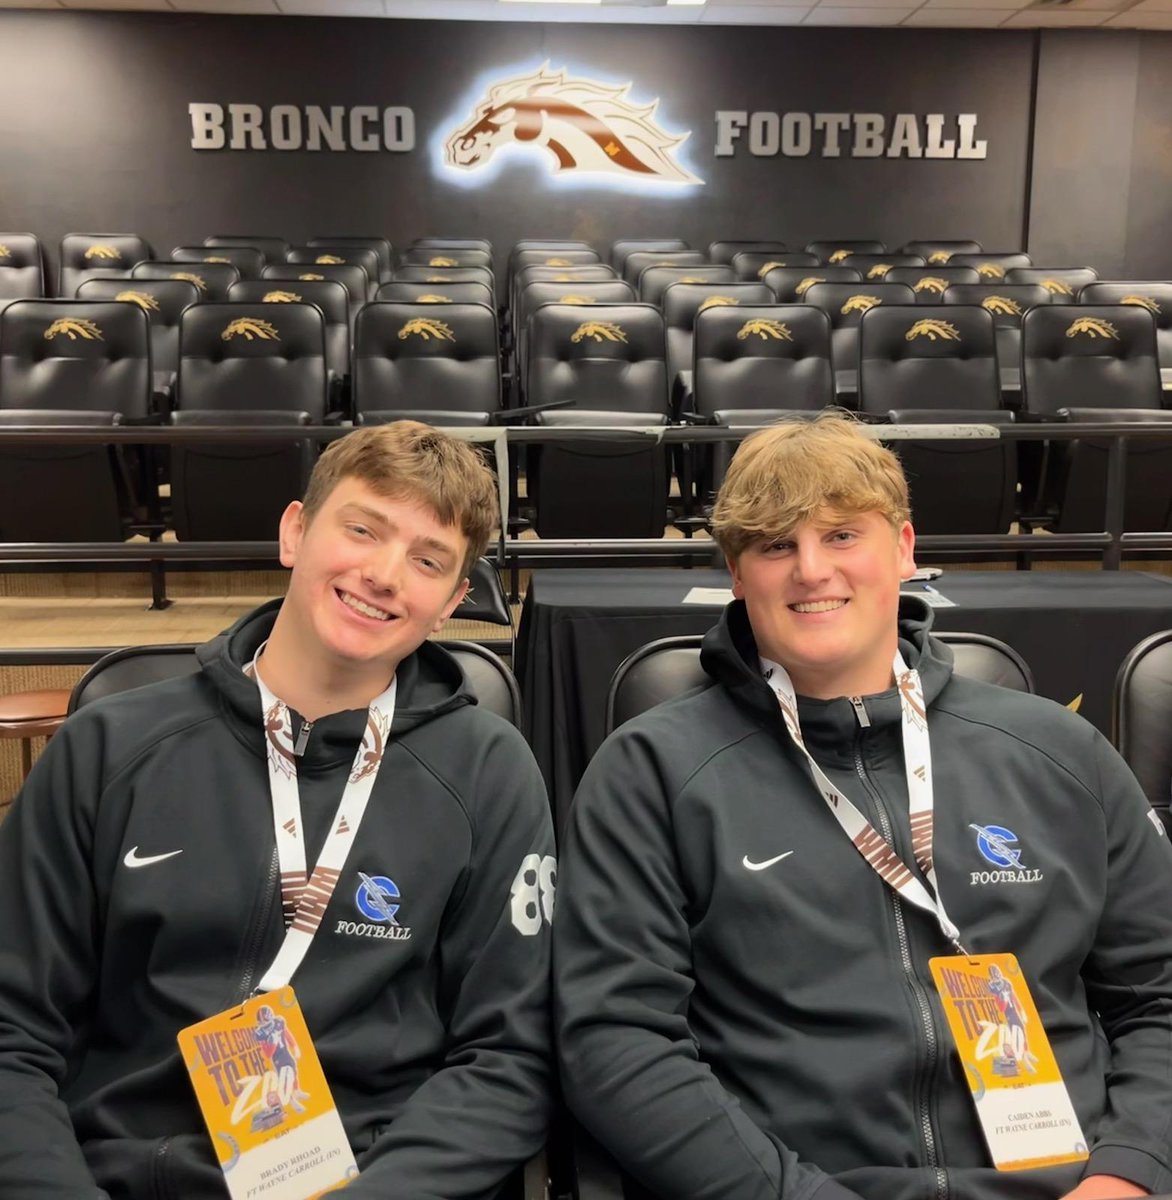 Monday I had a fantastic visit at @WMU_Football. It was great to meet @CoachLT39, watch practice, tour campus and spend time getting to know @CoachTMendelson and @CoachWillAhrens. Plus, I got to hang with @brady_rhoad!